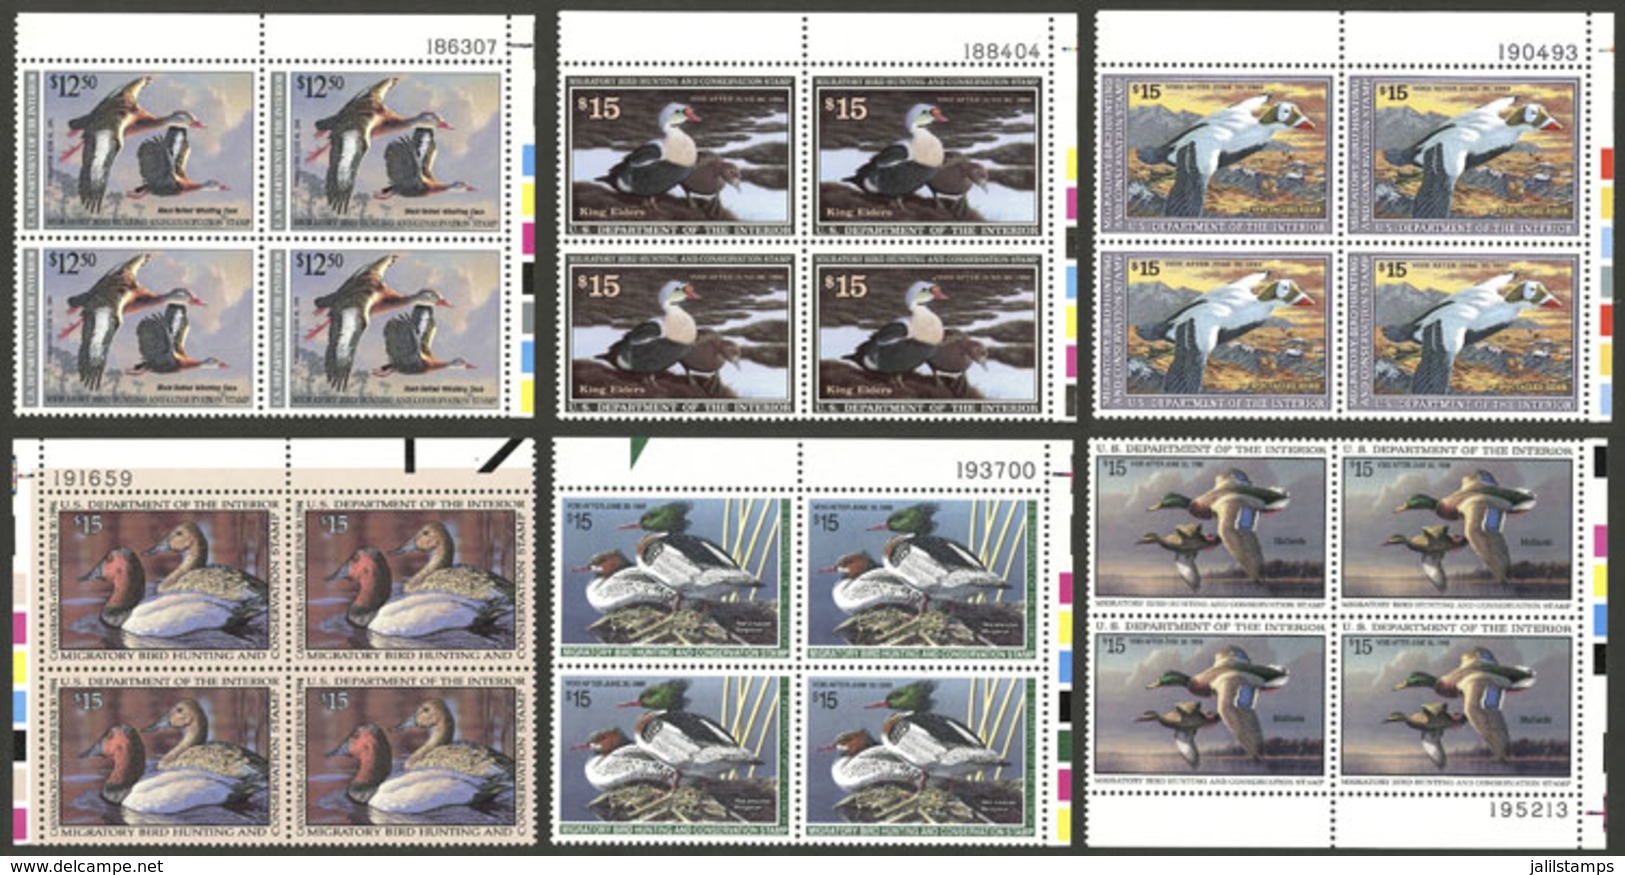 UNITED STATES: HUNTING PERMIT STAMPS: 6 MNH Blocks Of 4 Of Excellent Quality, Including Year 1991 To 1996, Face Value US - Steuermarken